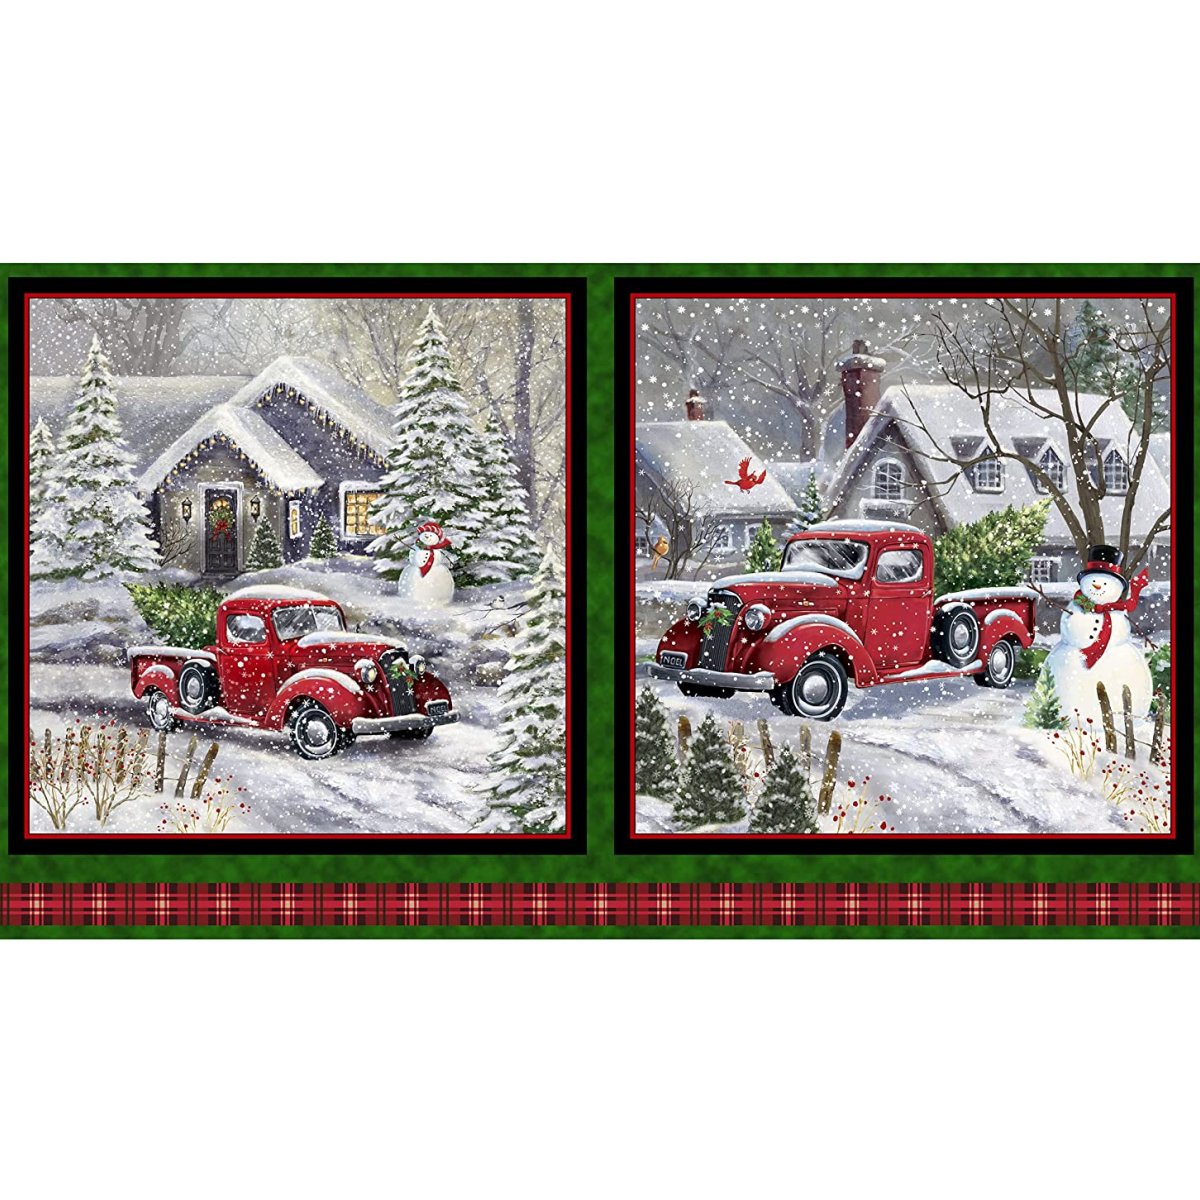 RED TRUCK CHRISTMAS PICTURE - WINTER GREETINGS